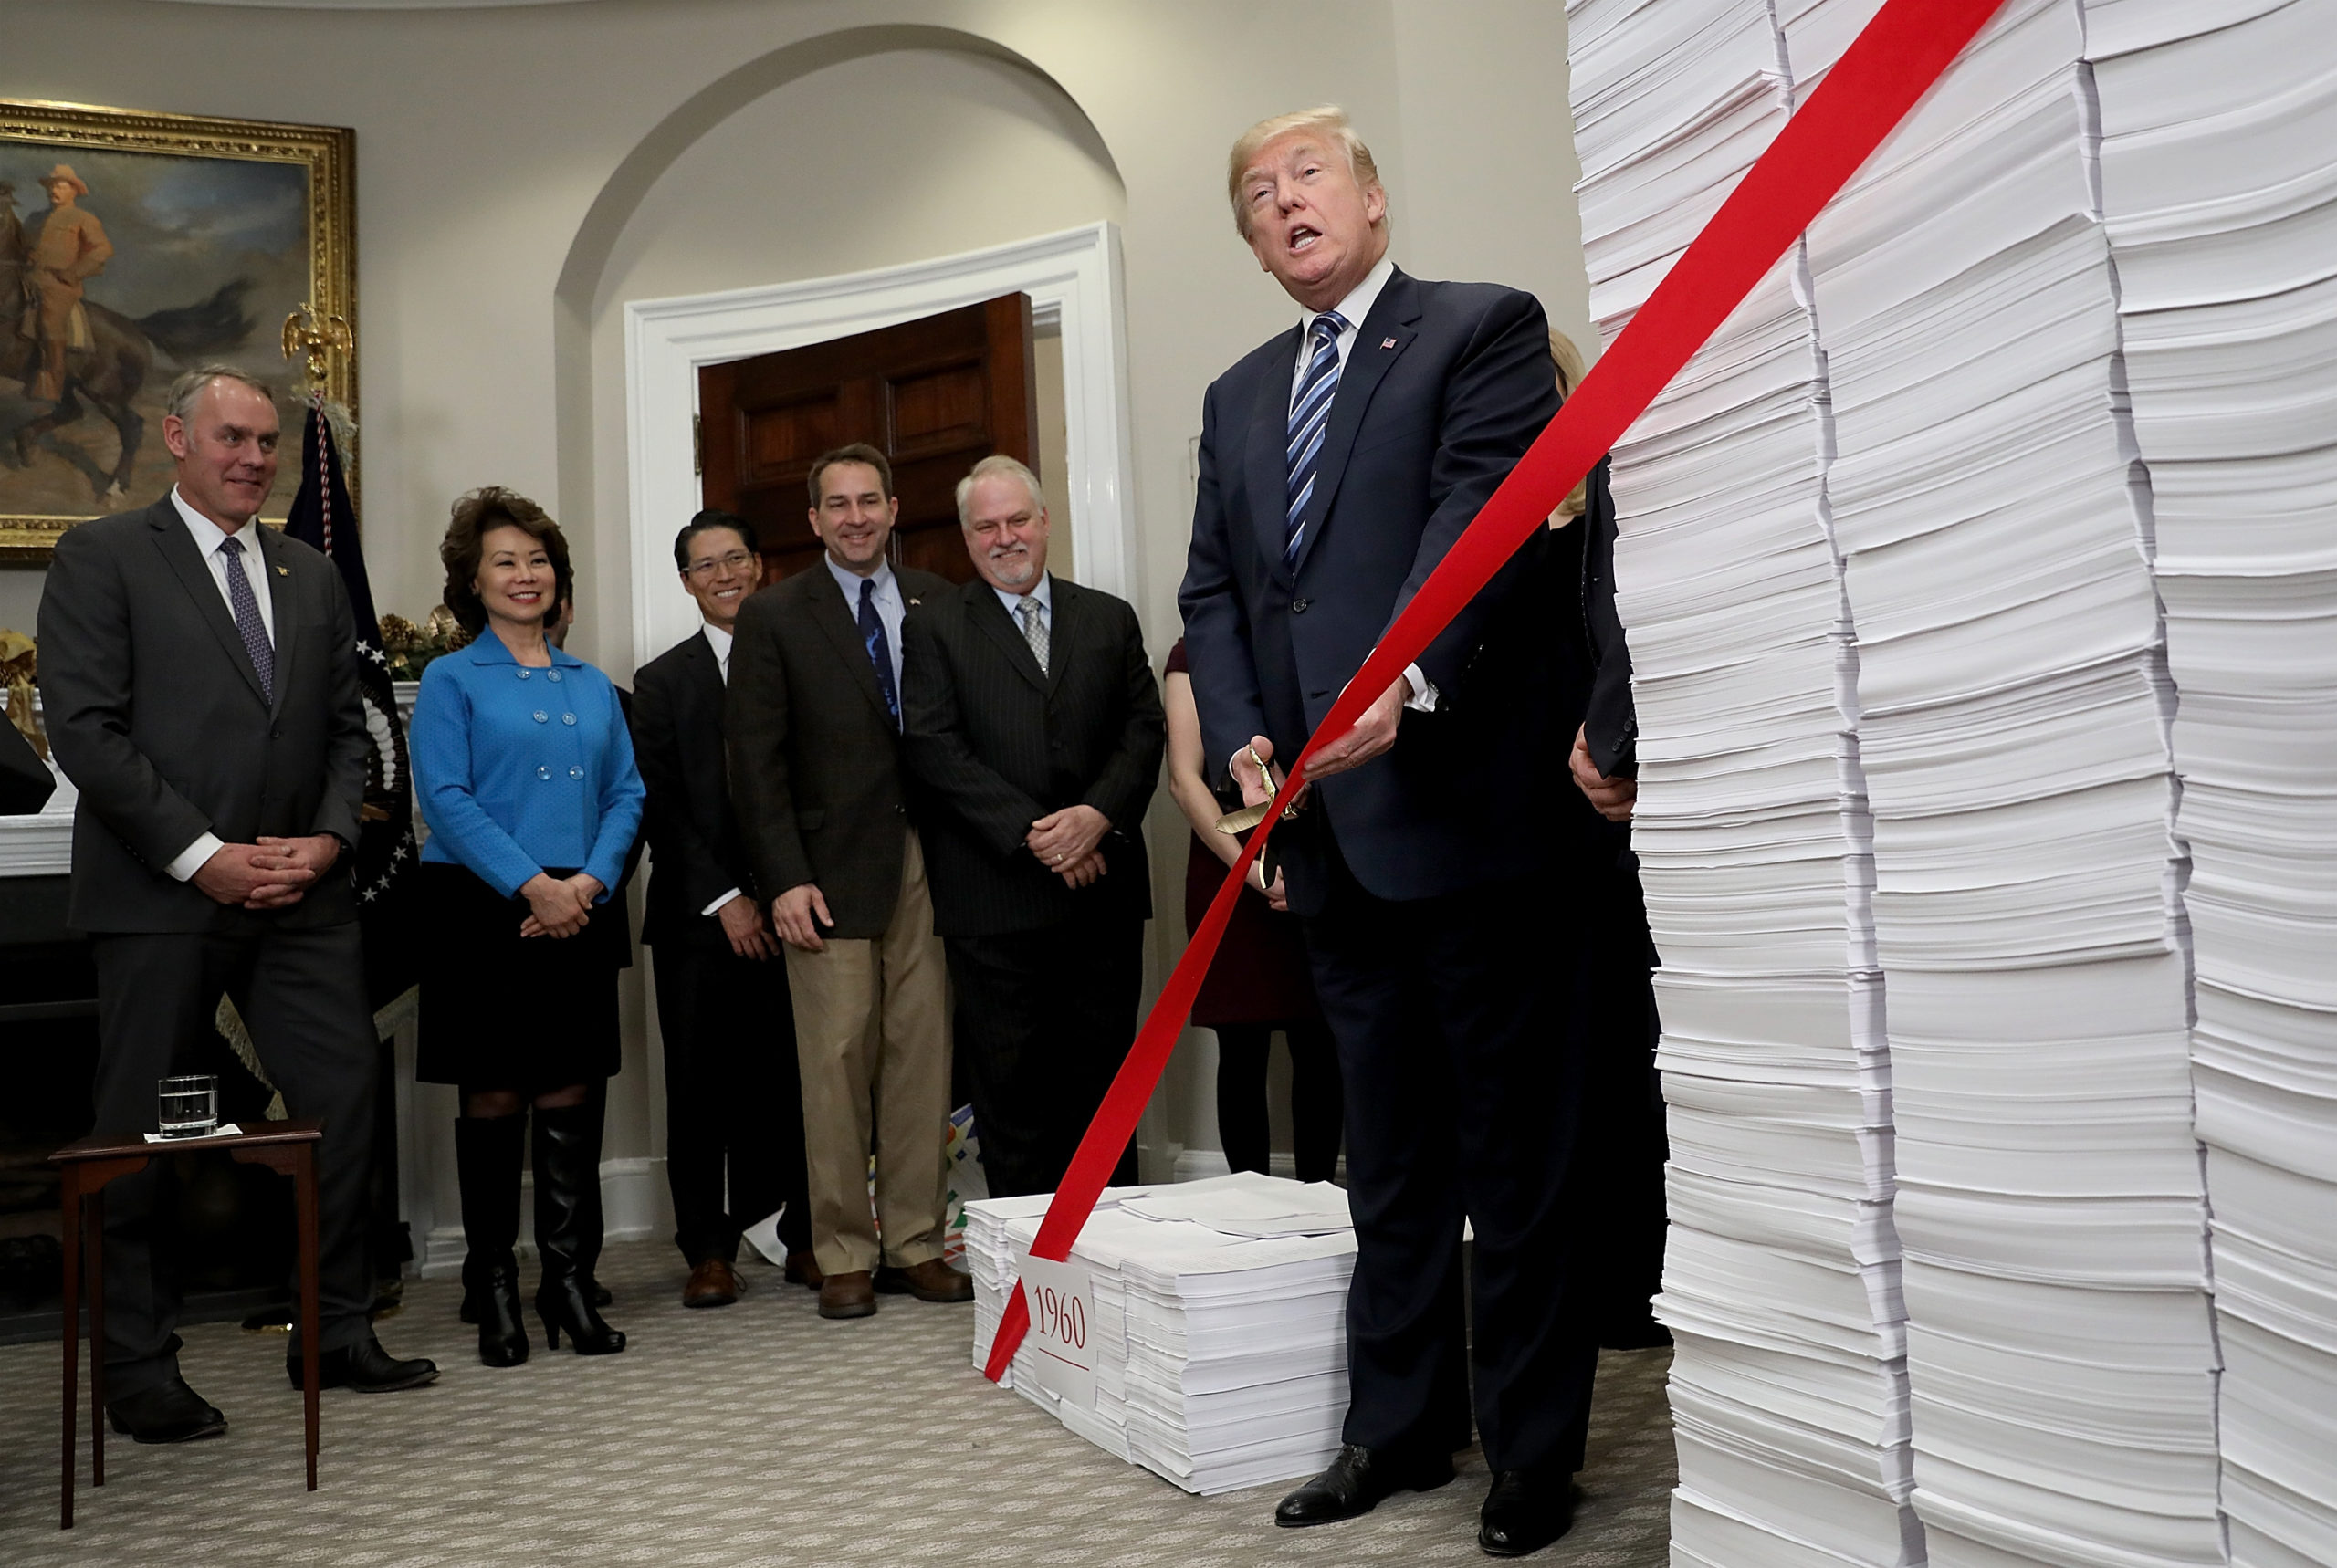 WASHINGTON, DC - DECEMBER 14: U.S. President Donald Trump cuts a symbolic piece of red tape during an event at the White House promoting the administration's efforts to decrease federal regulations December 14, 2017 in Washington, DC. The administration has vowed to remove two regulations for every single regulation added. (Photo by Win McNamee/Getty Images)